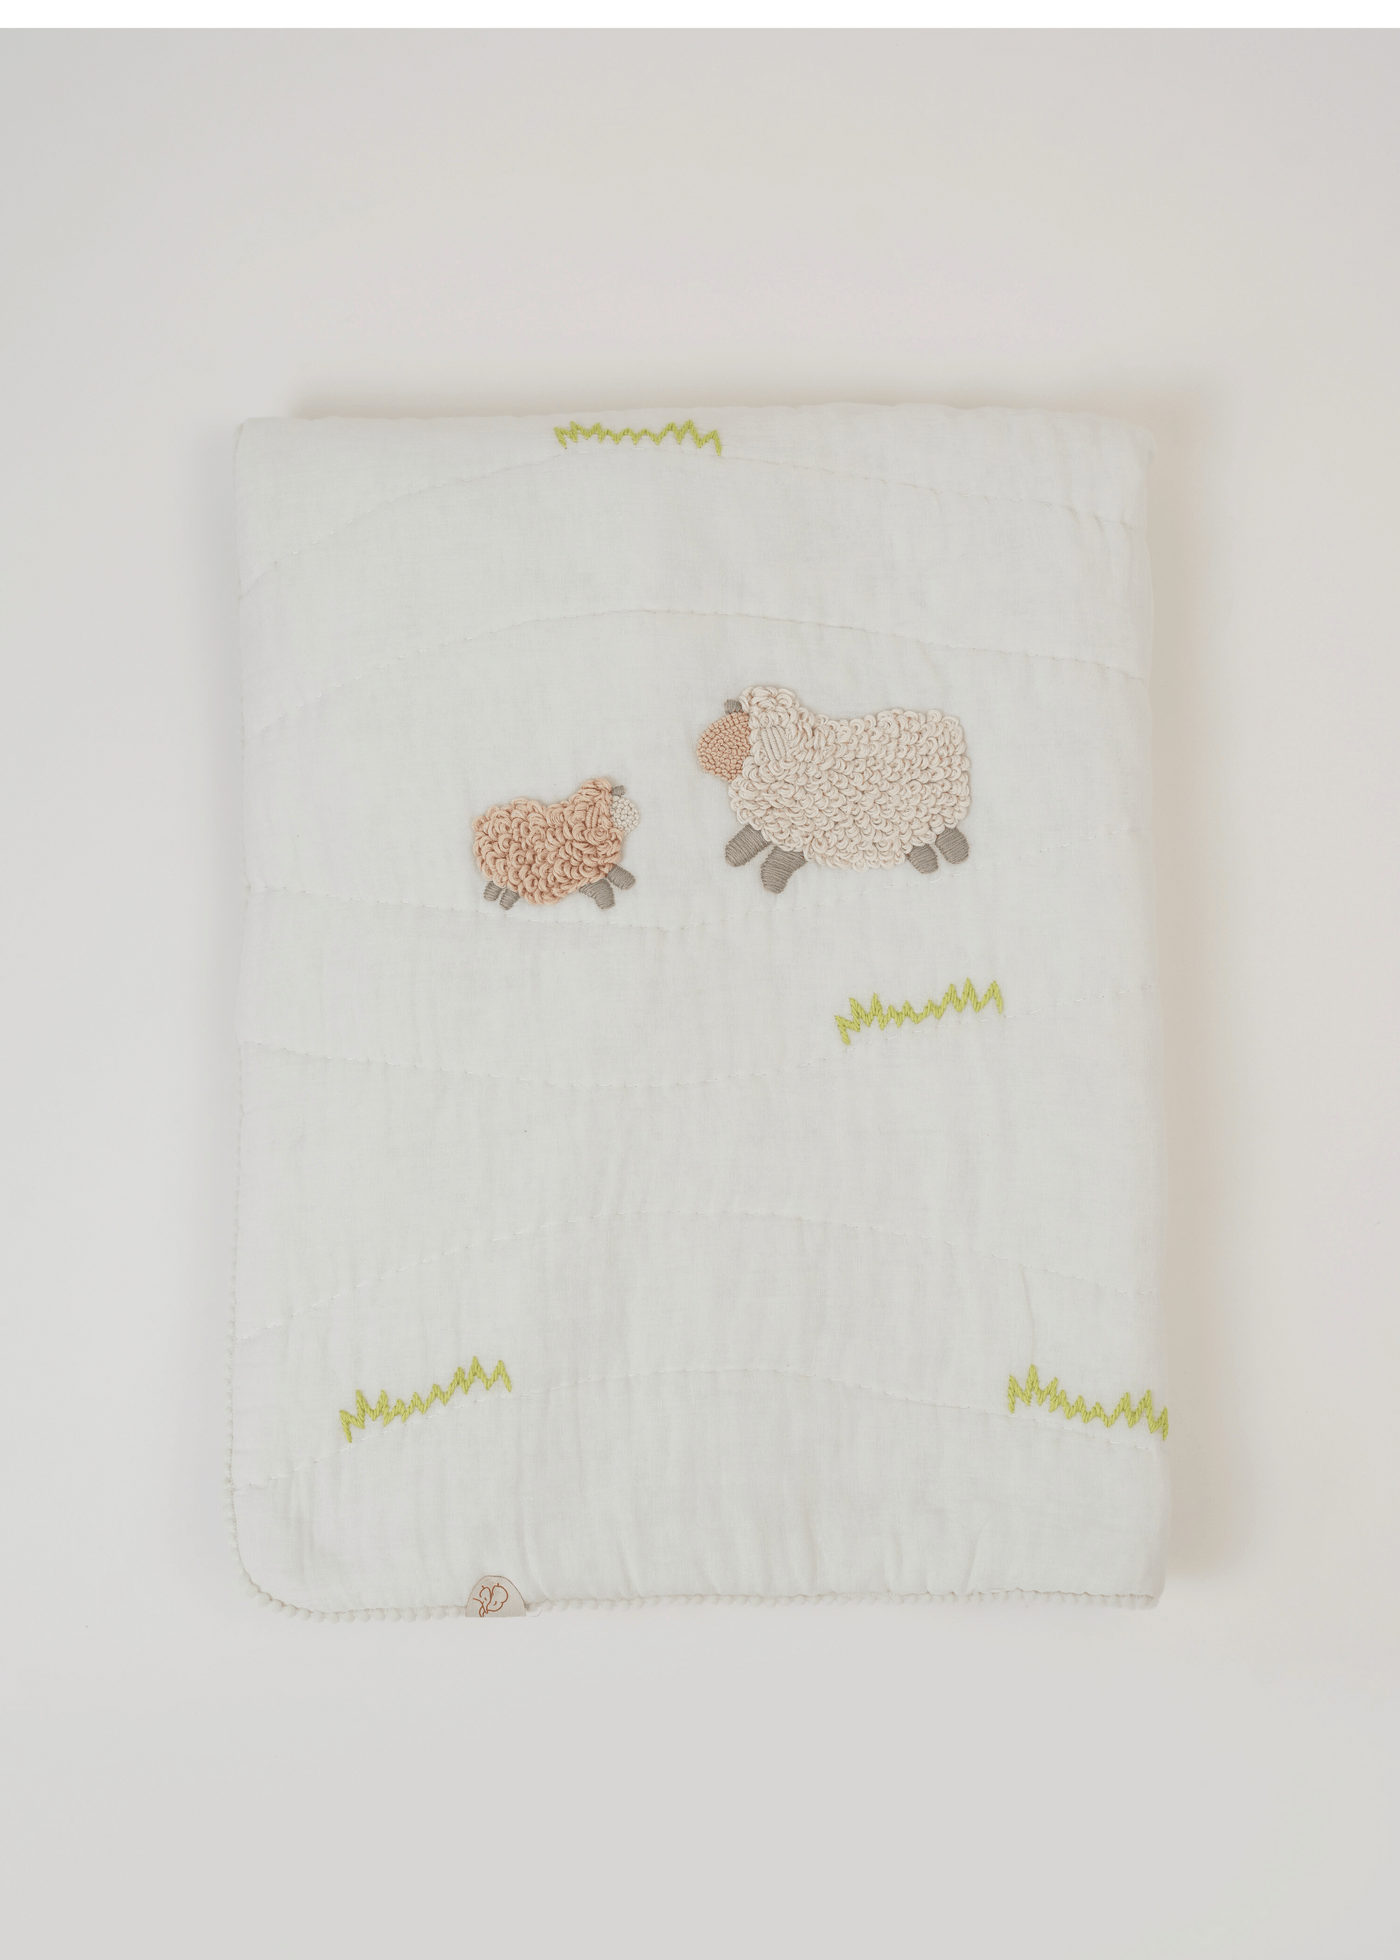 Couting Sheep Blanket & Pillow Gift Box